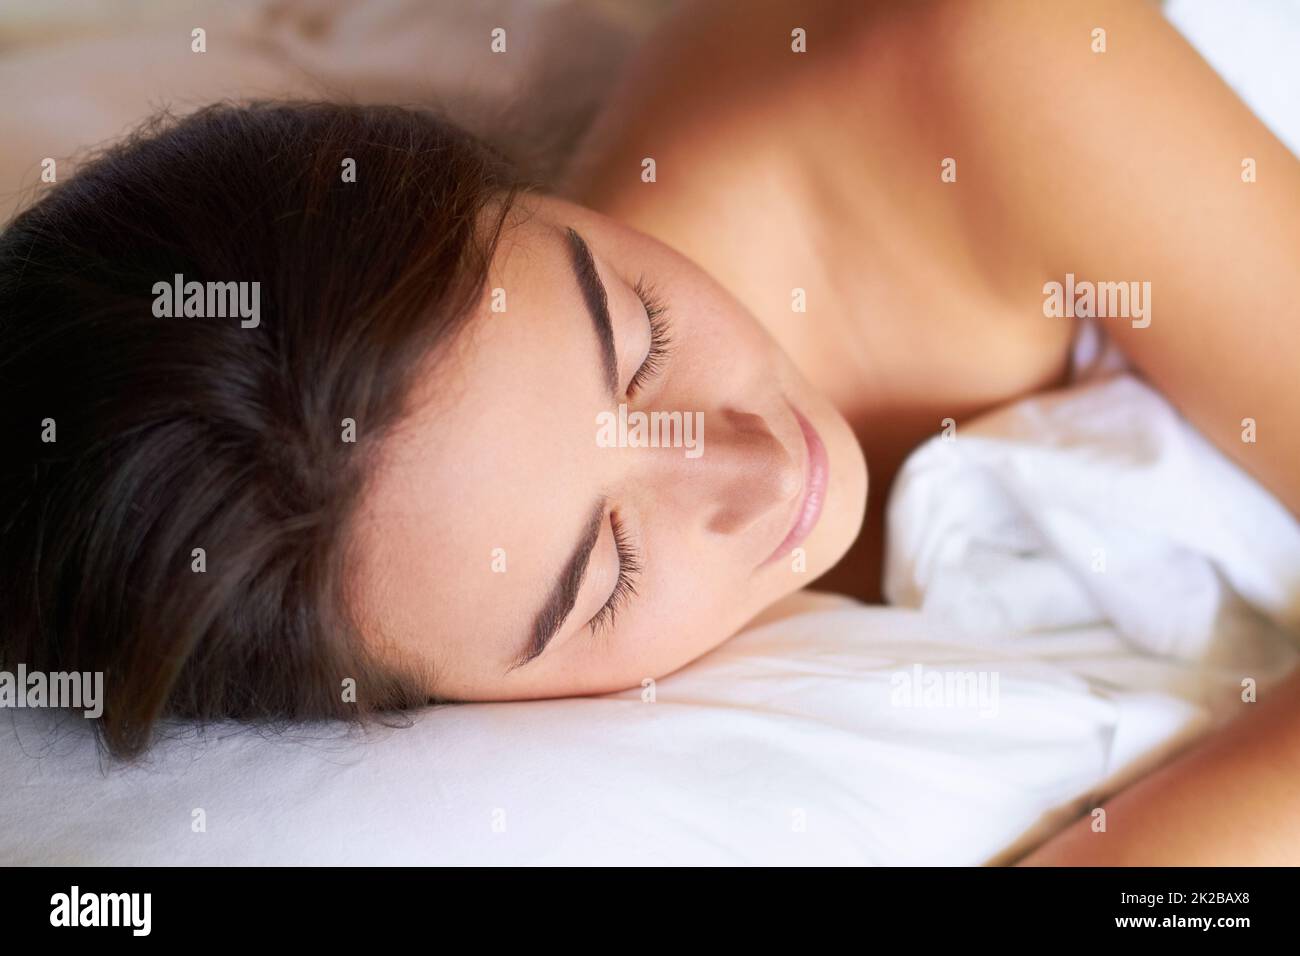 This is where I come to dream. Shot of a naturally beautiful woman sleeping. Stock Photo